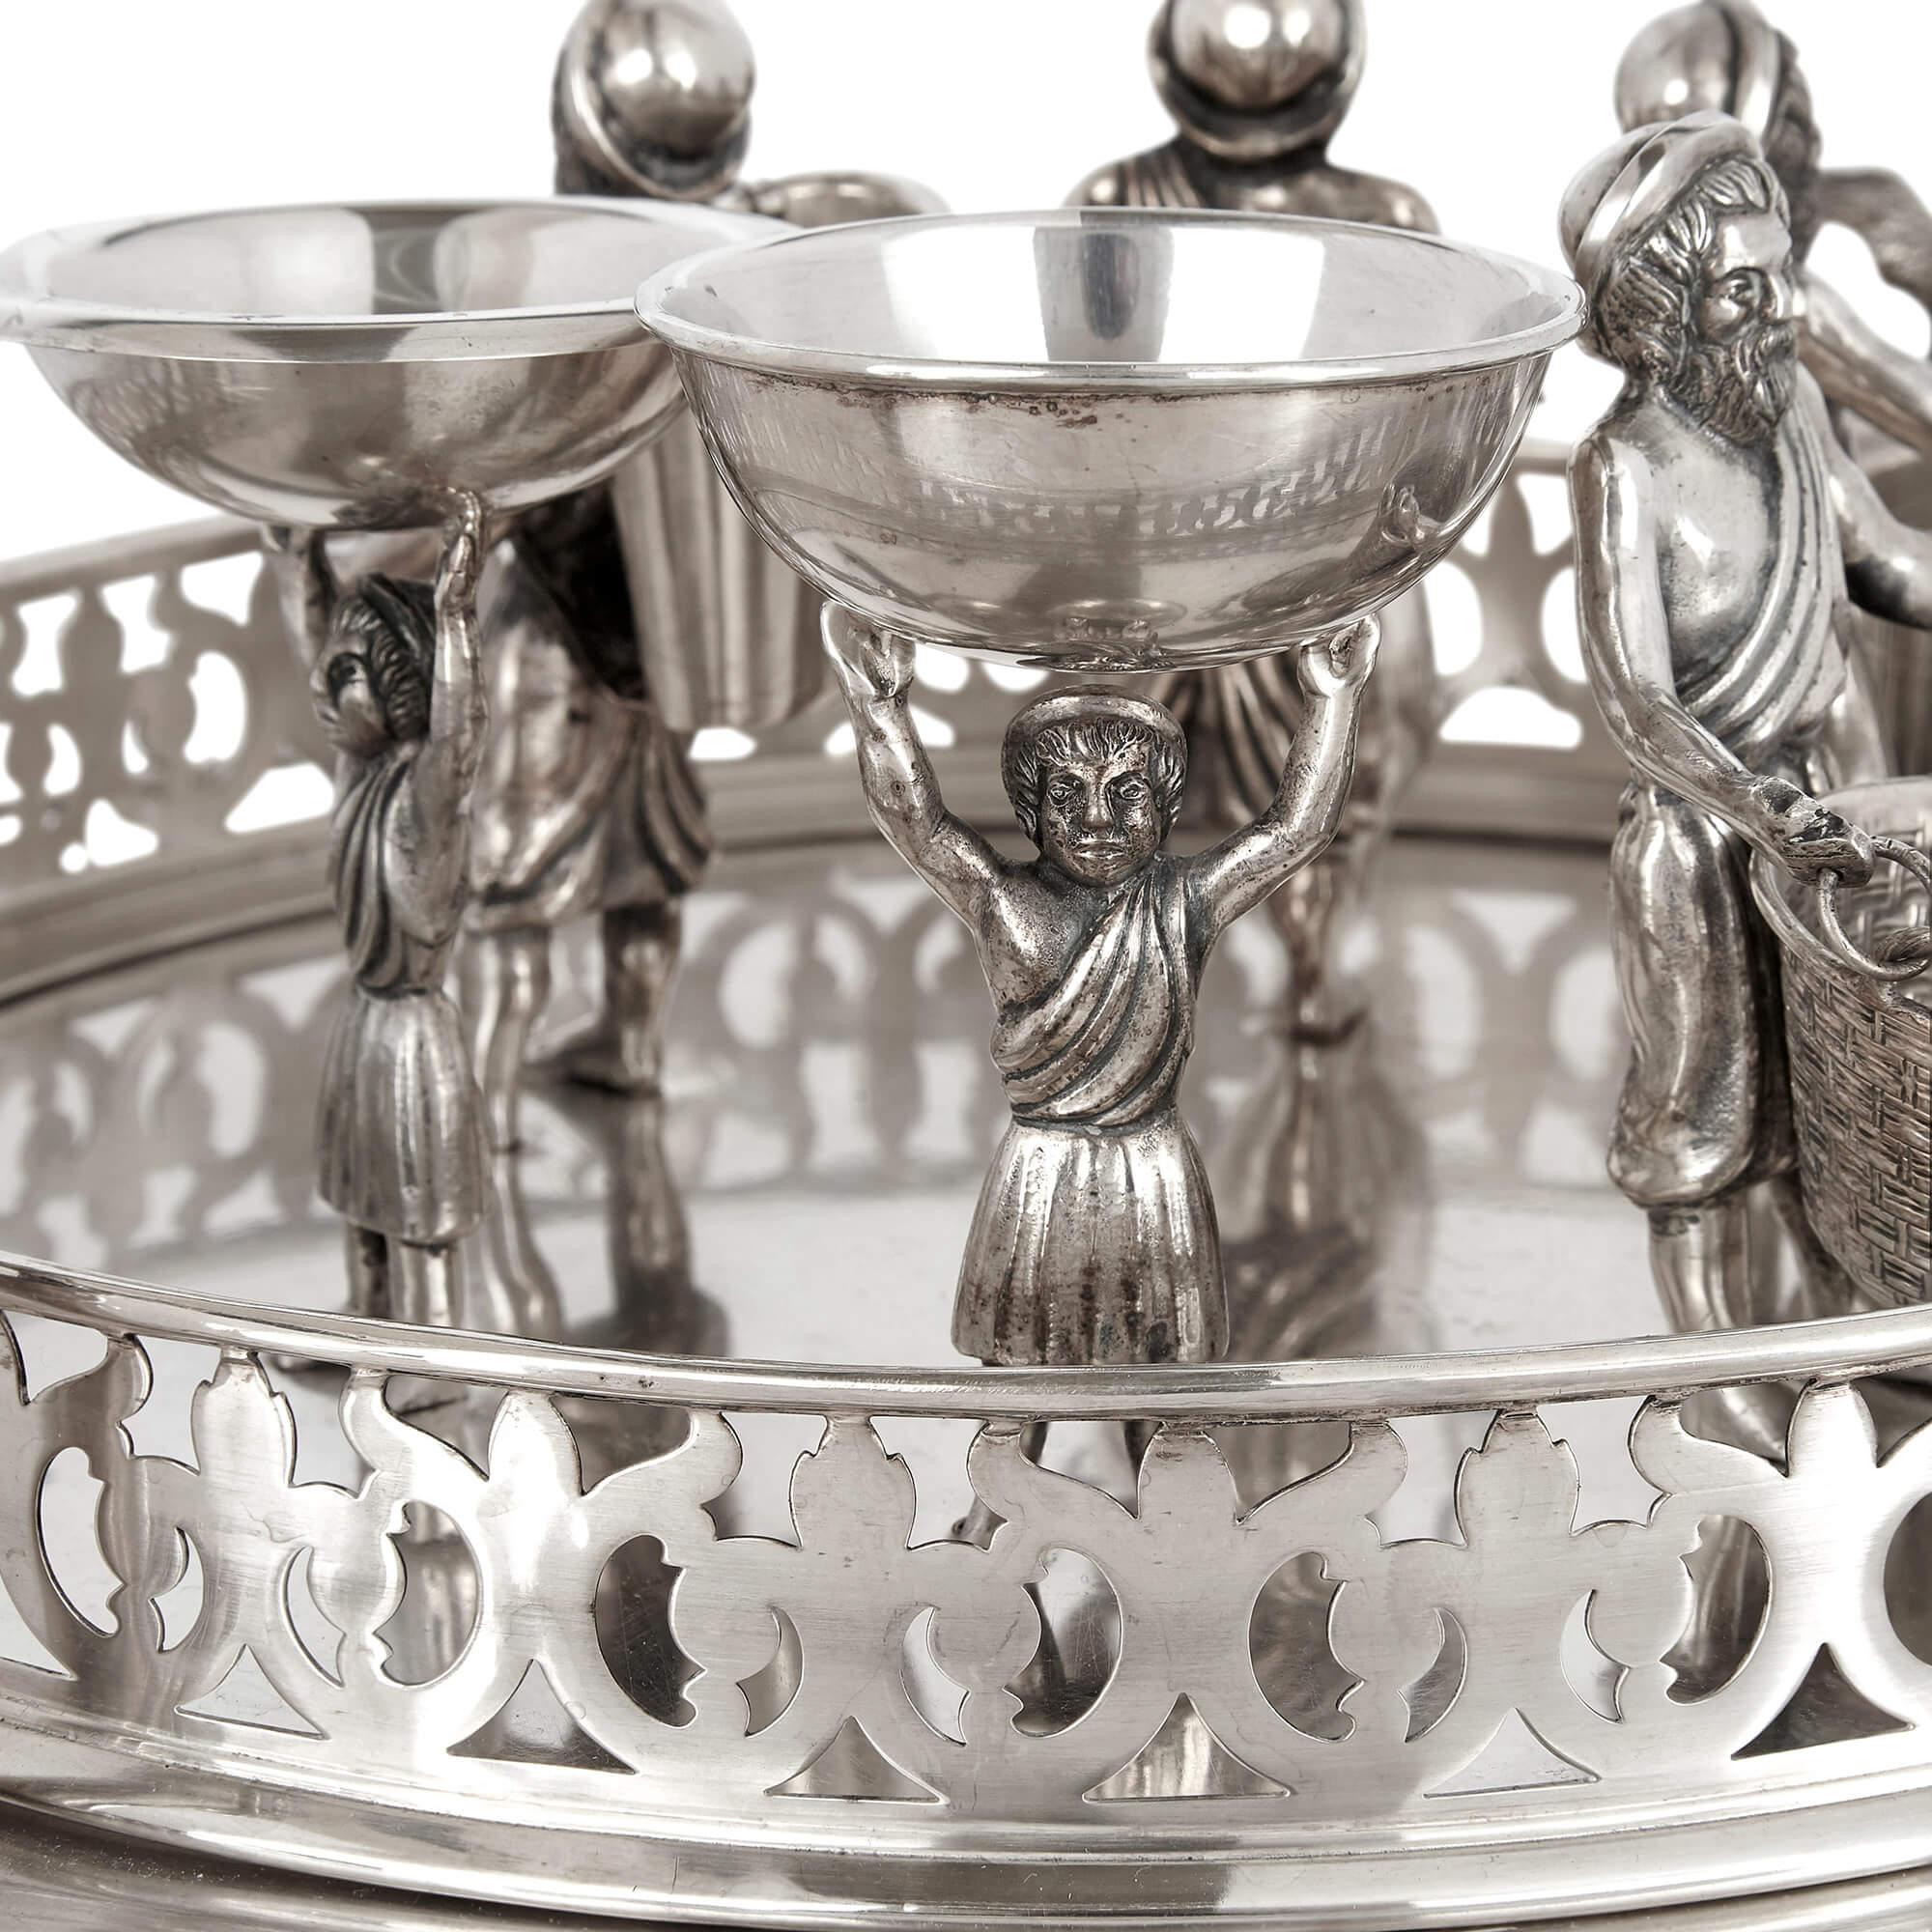 European Silver Jewish Multi-Tiered Passover Seder Tray For Sale